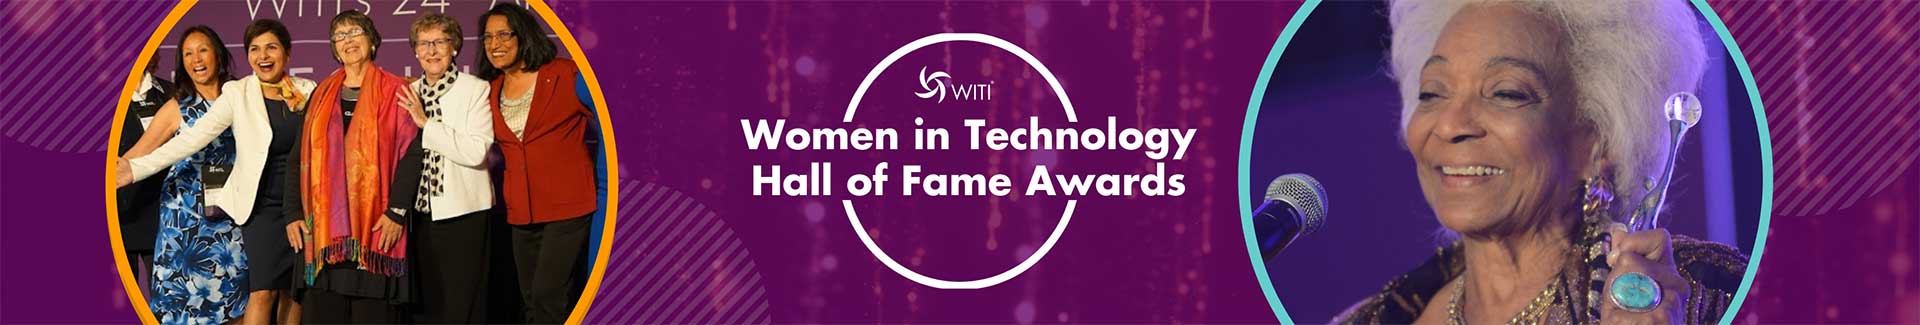 Women in Technology Hall of Fame